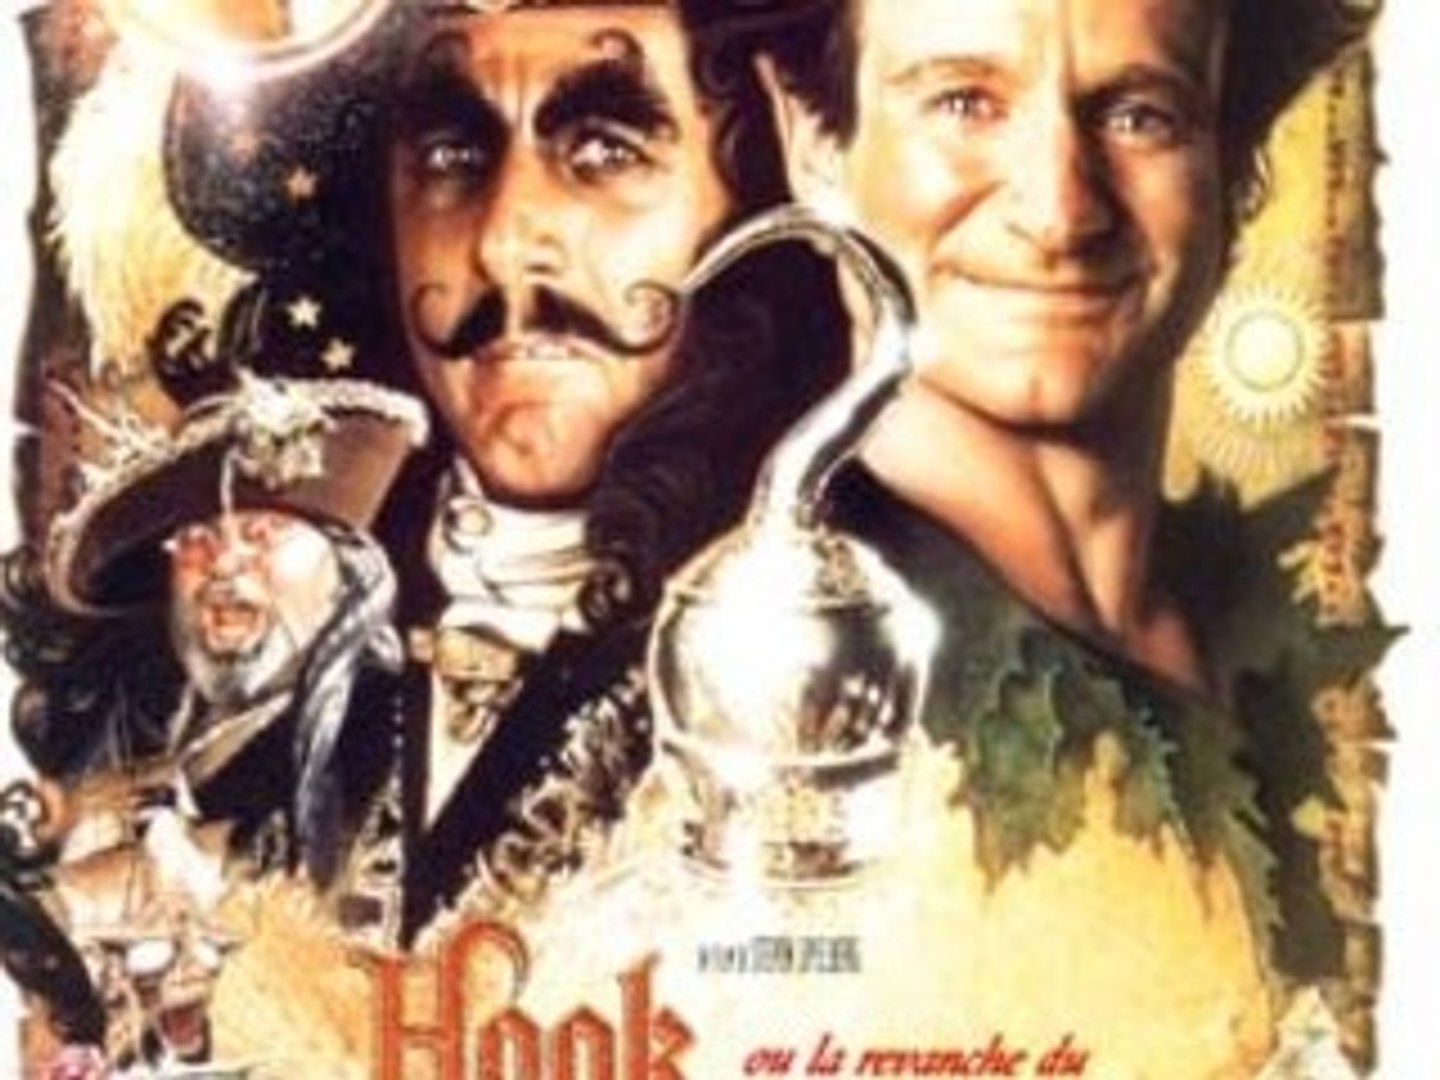 Highlights from Hook - Vidéo Dailymotion